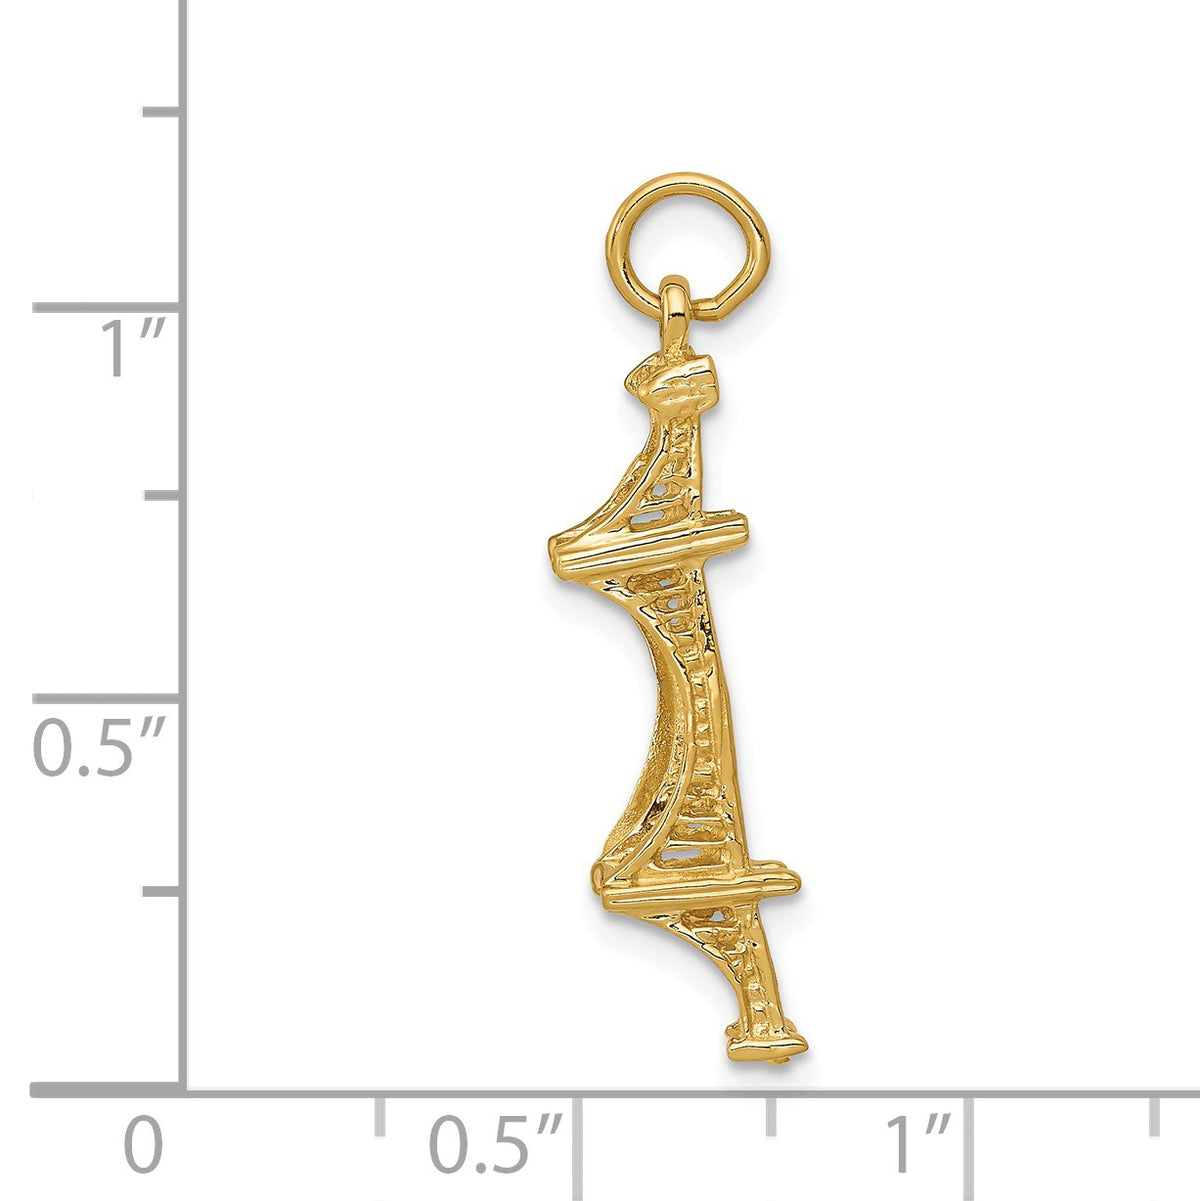 Alternate view of the 14k Yellow Gold 3-D Golden Gate Bridge Charm by The Black Bow Jewelry Co.